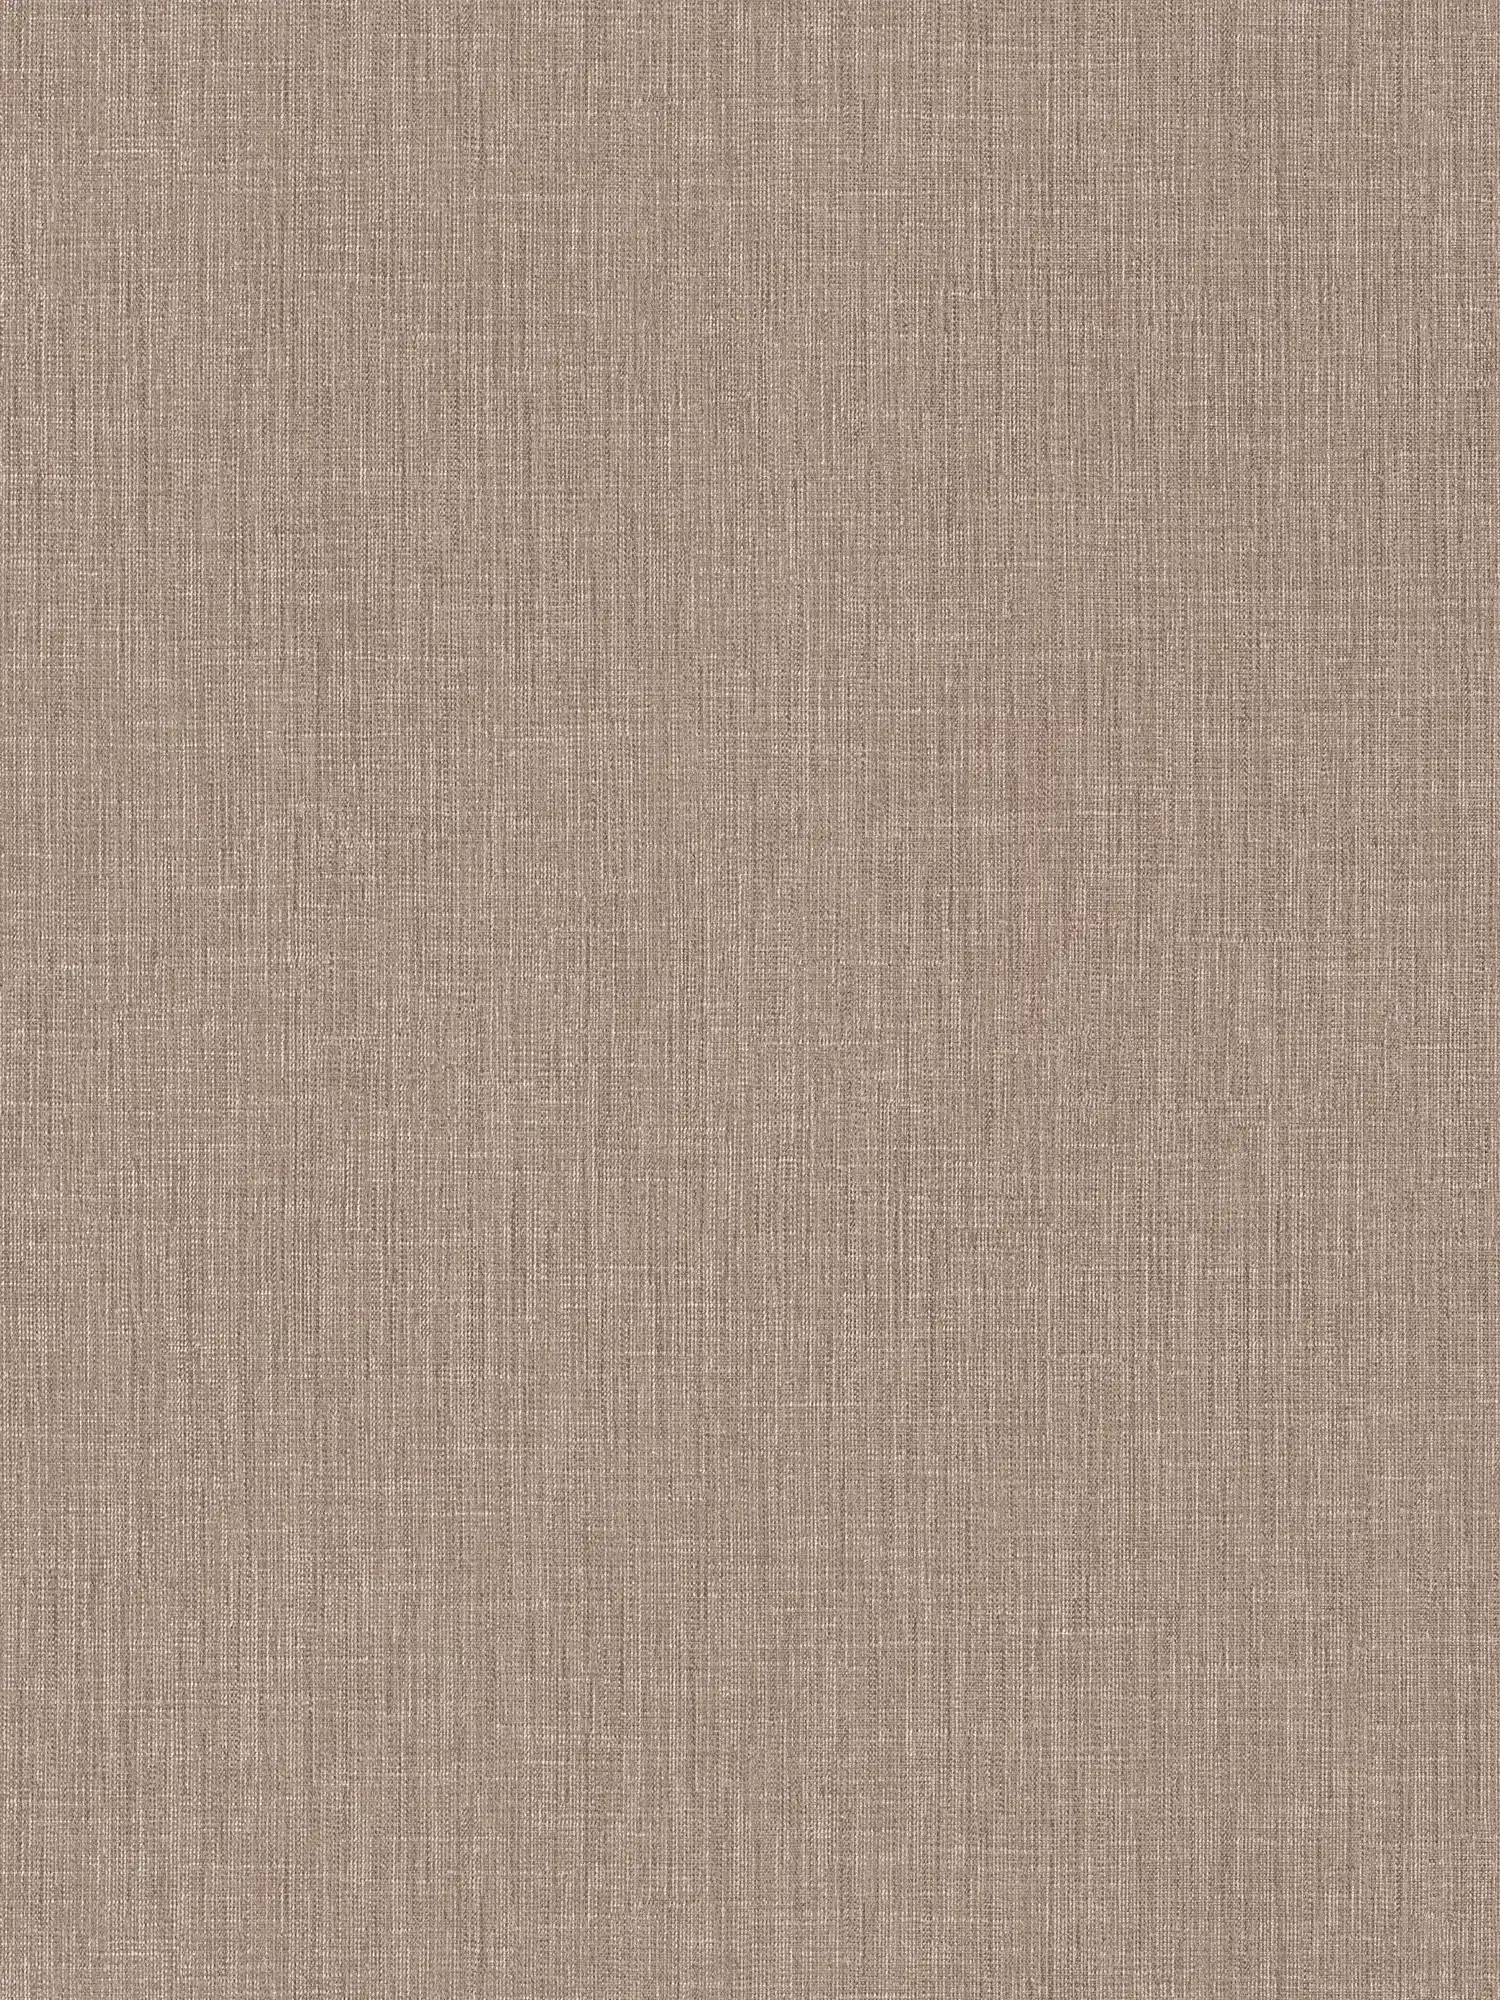 Non-woven wallpaper linen look with tone-on-tone pattern - brown, cream
